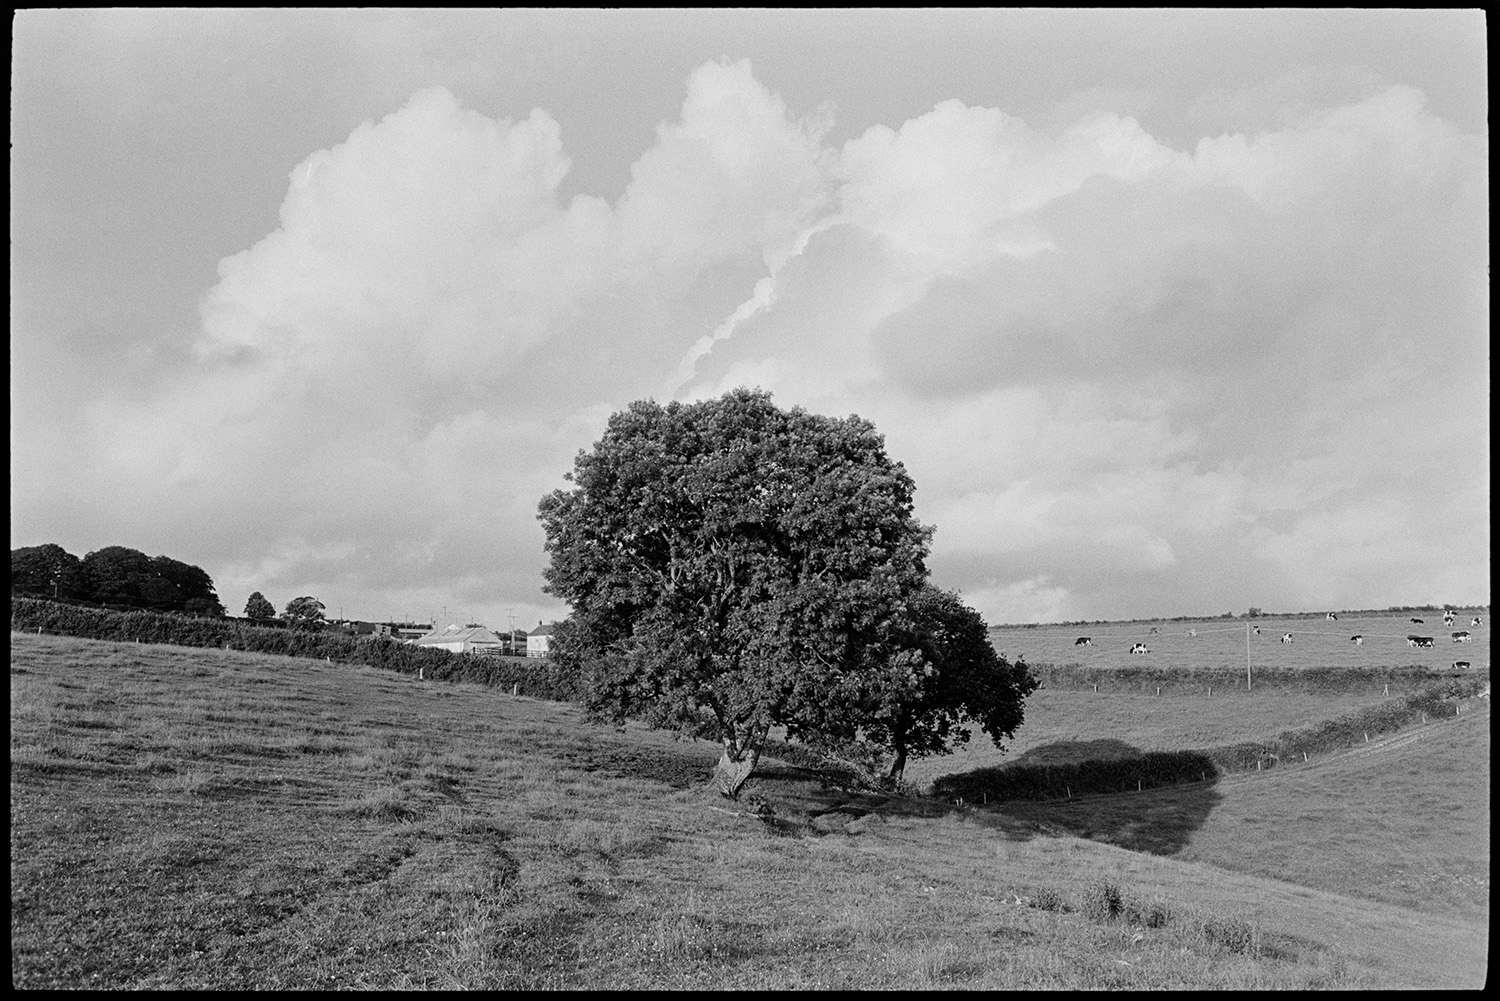 Tree in field, cloud and shadows.
[ A solitary tree in a field at Beaford Wood. Cows grazing in a field and farm buildings are visible in the background. Clouds can also be seen in the sky above.]